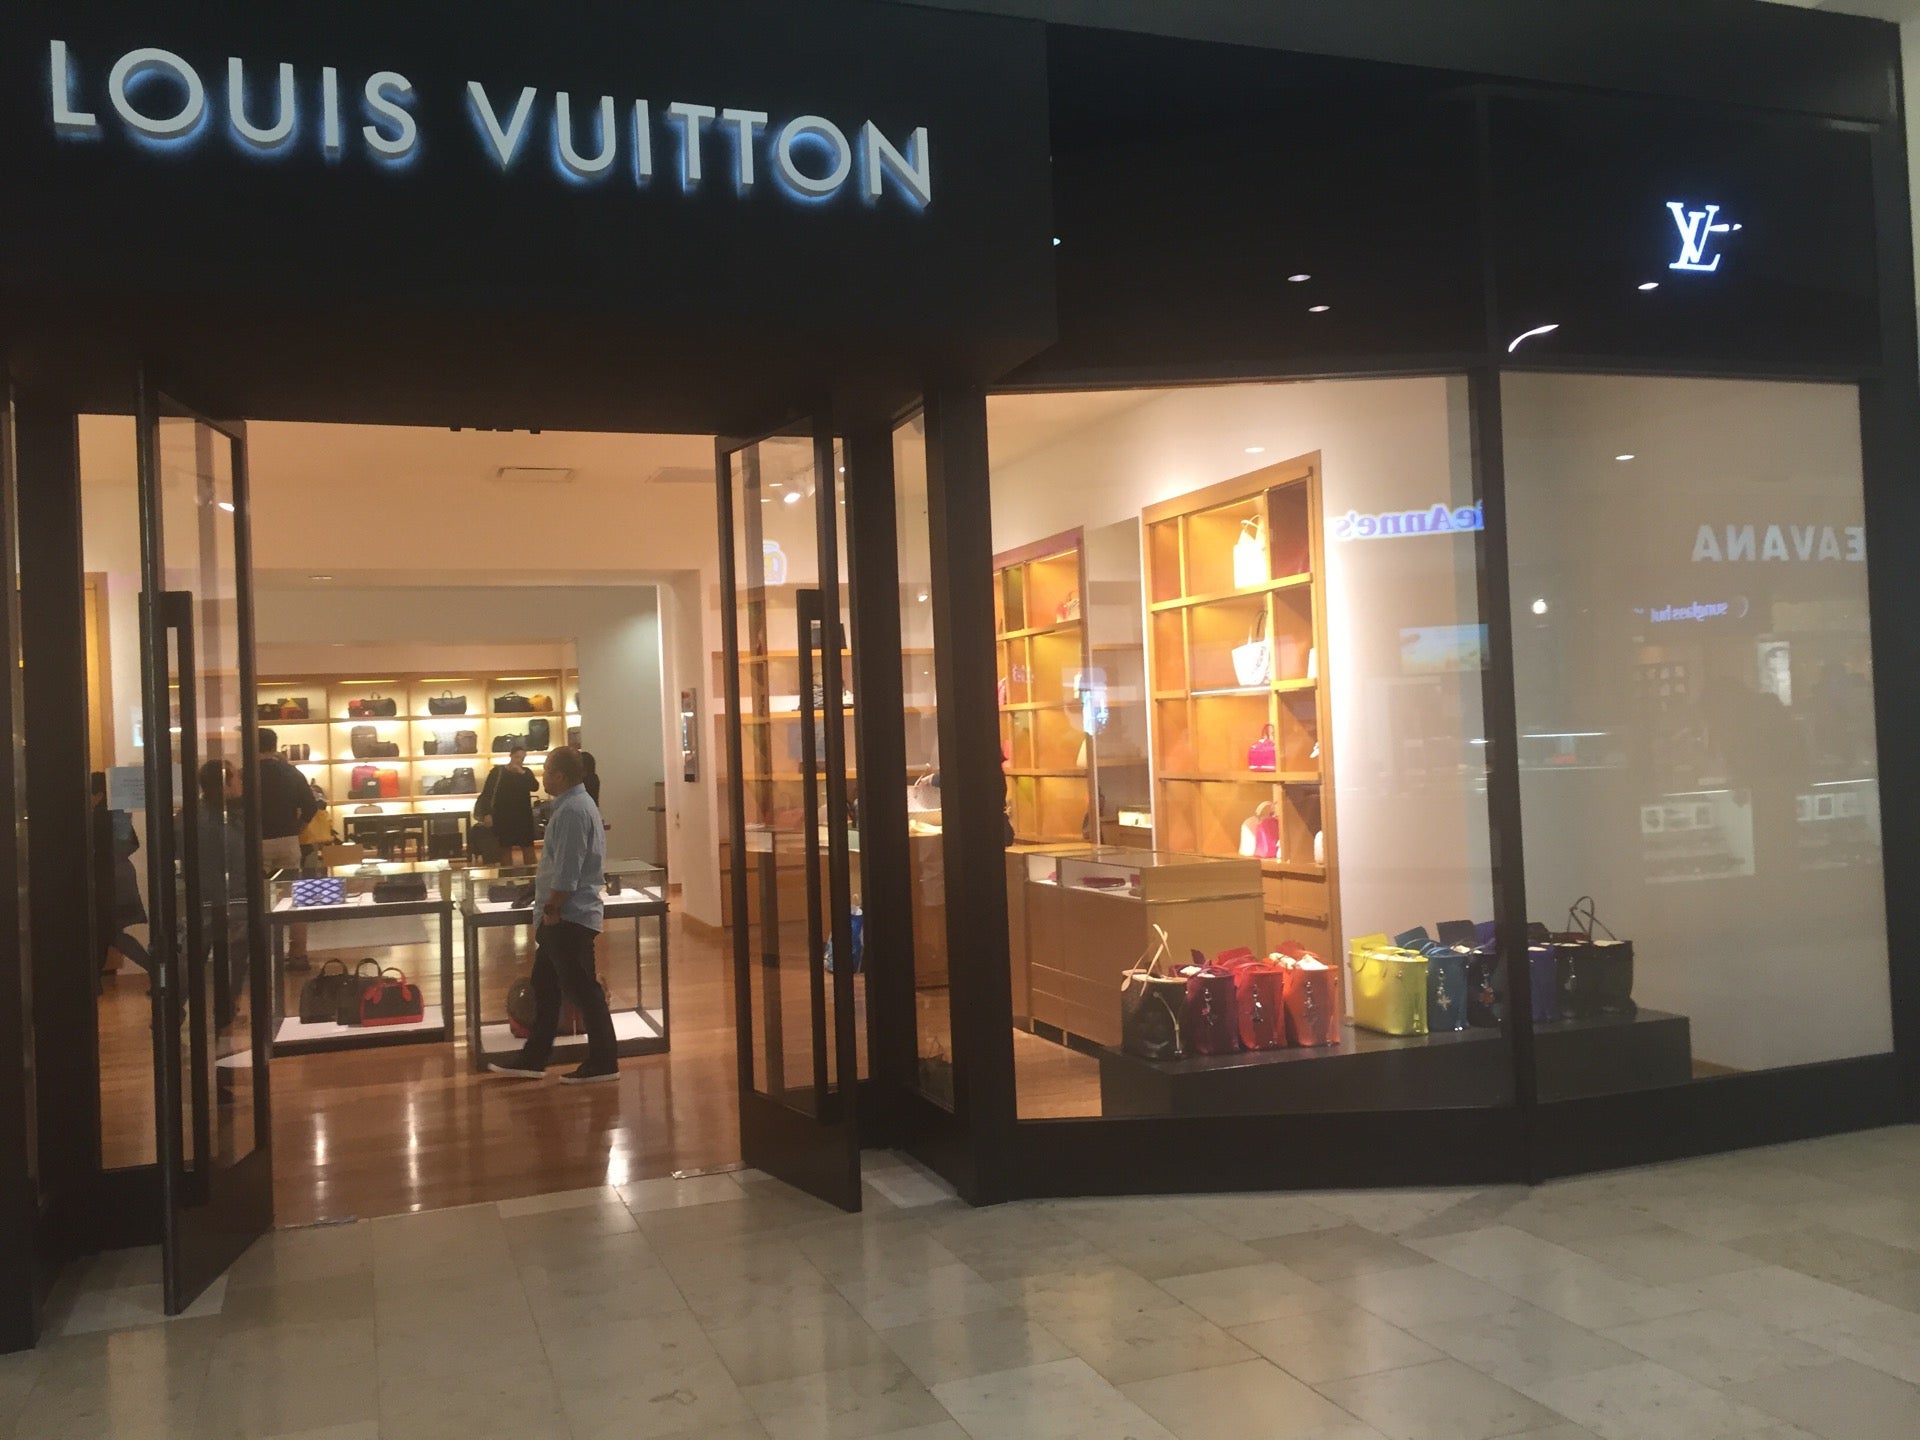 LouisVuitton window display in South Park mall in Charlotte, NC